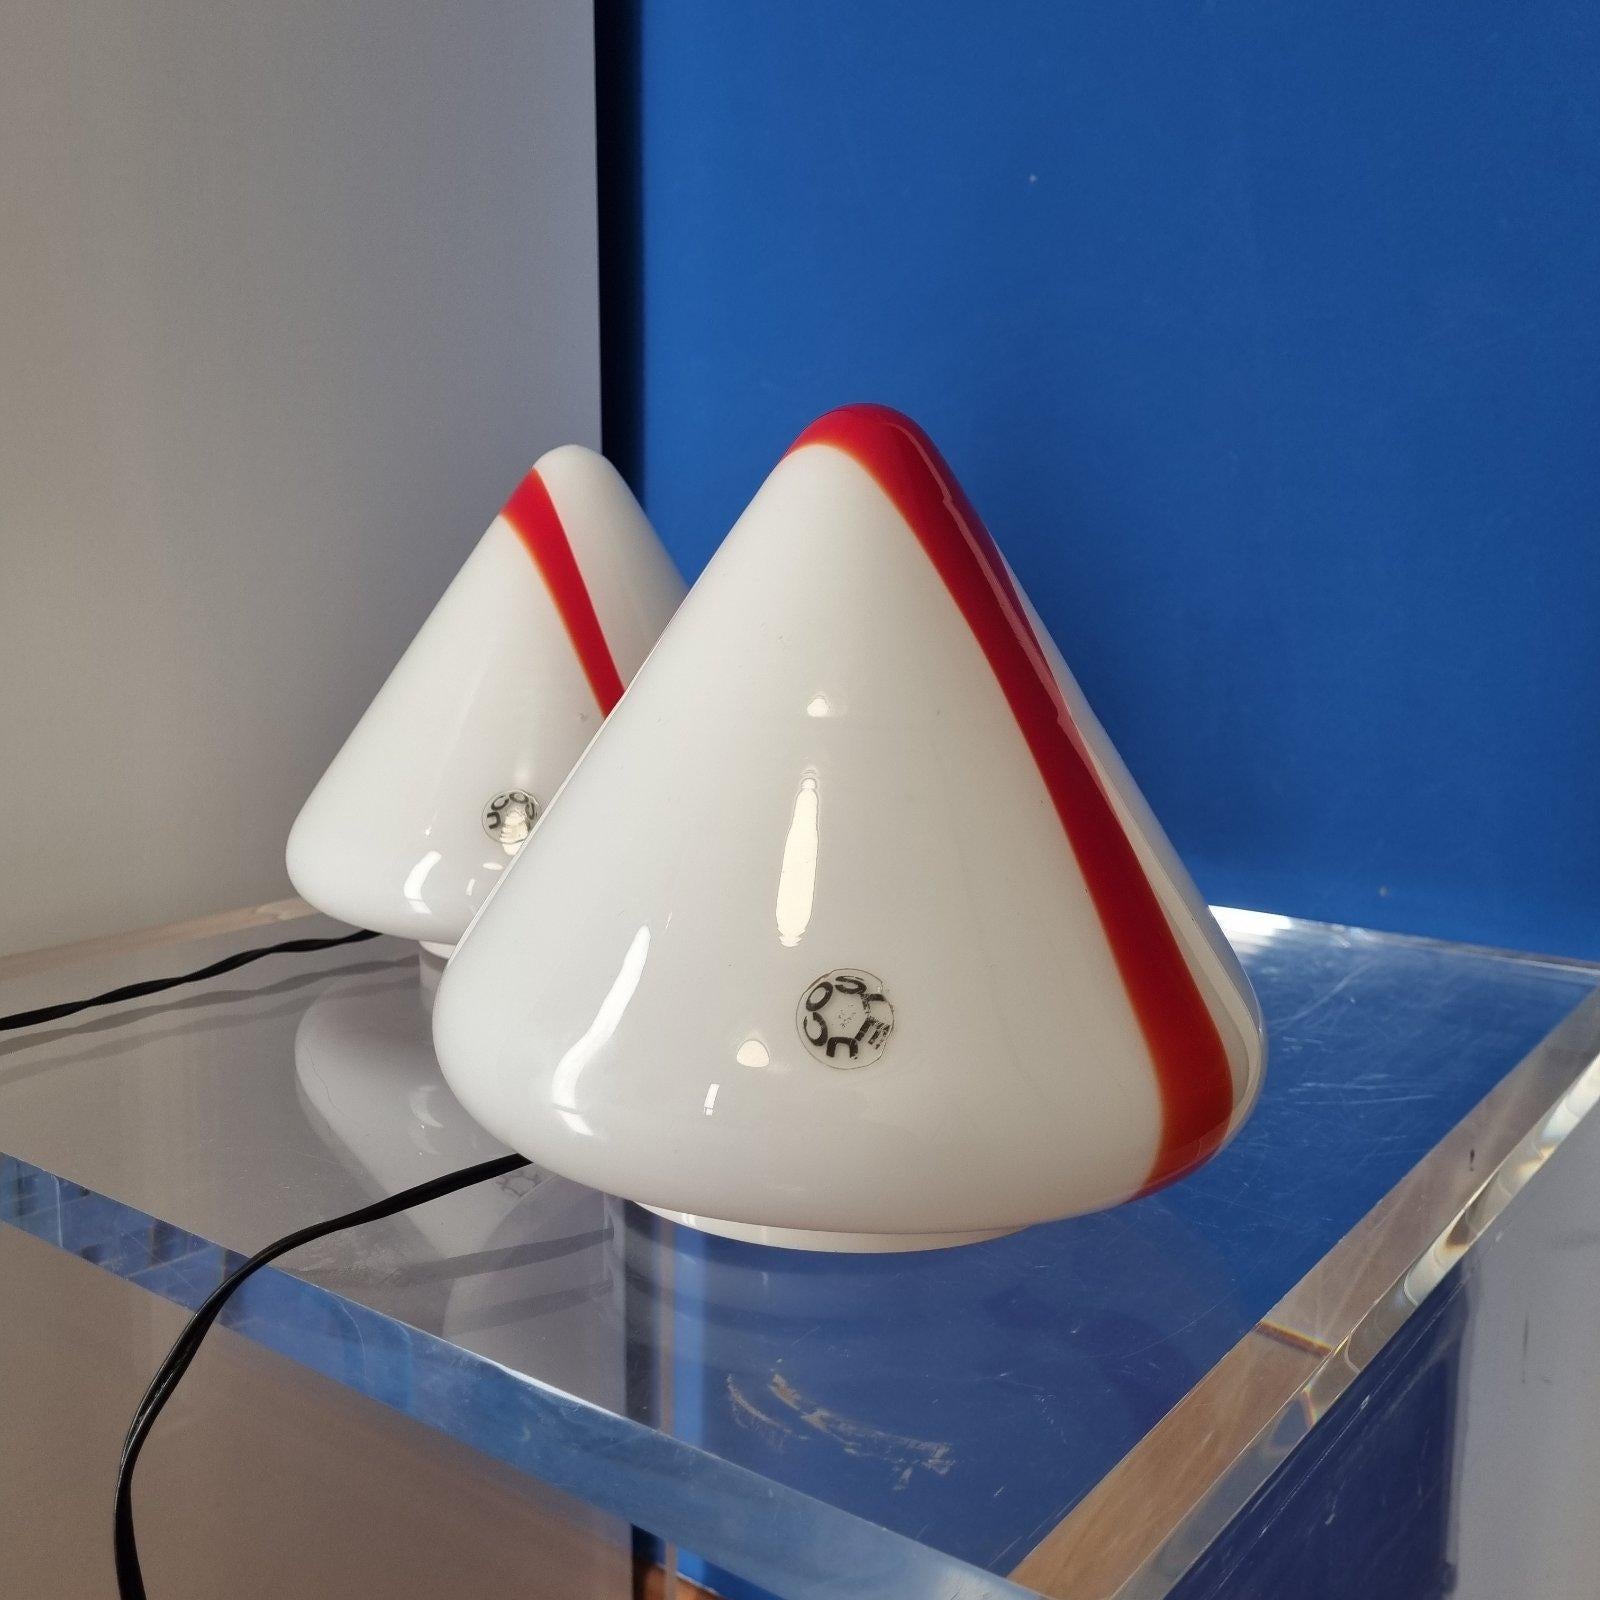 Pair of red and white Murano glass table or wall lamps designed by Renato Toso for Leucos.
The lamps are in excellent condition, working perfectly.